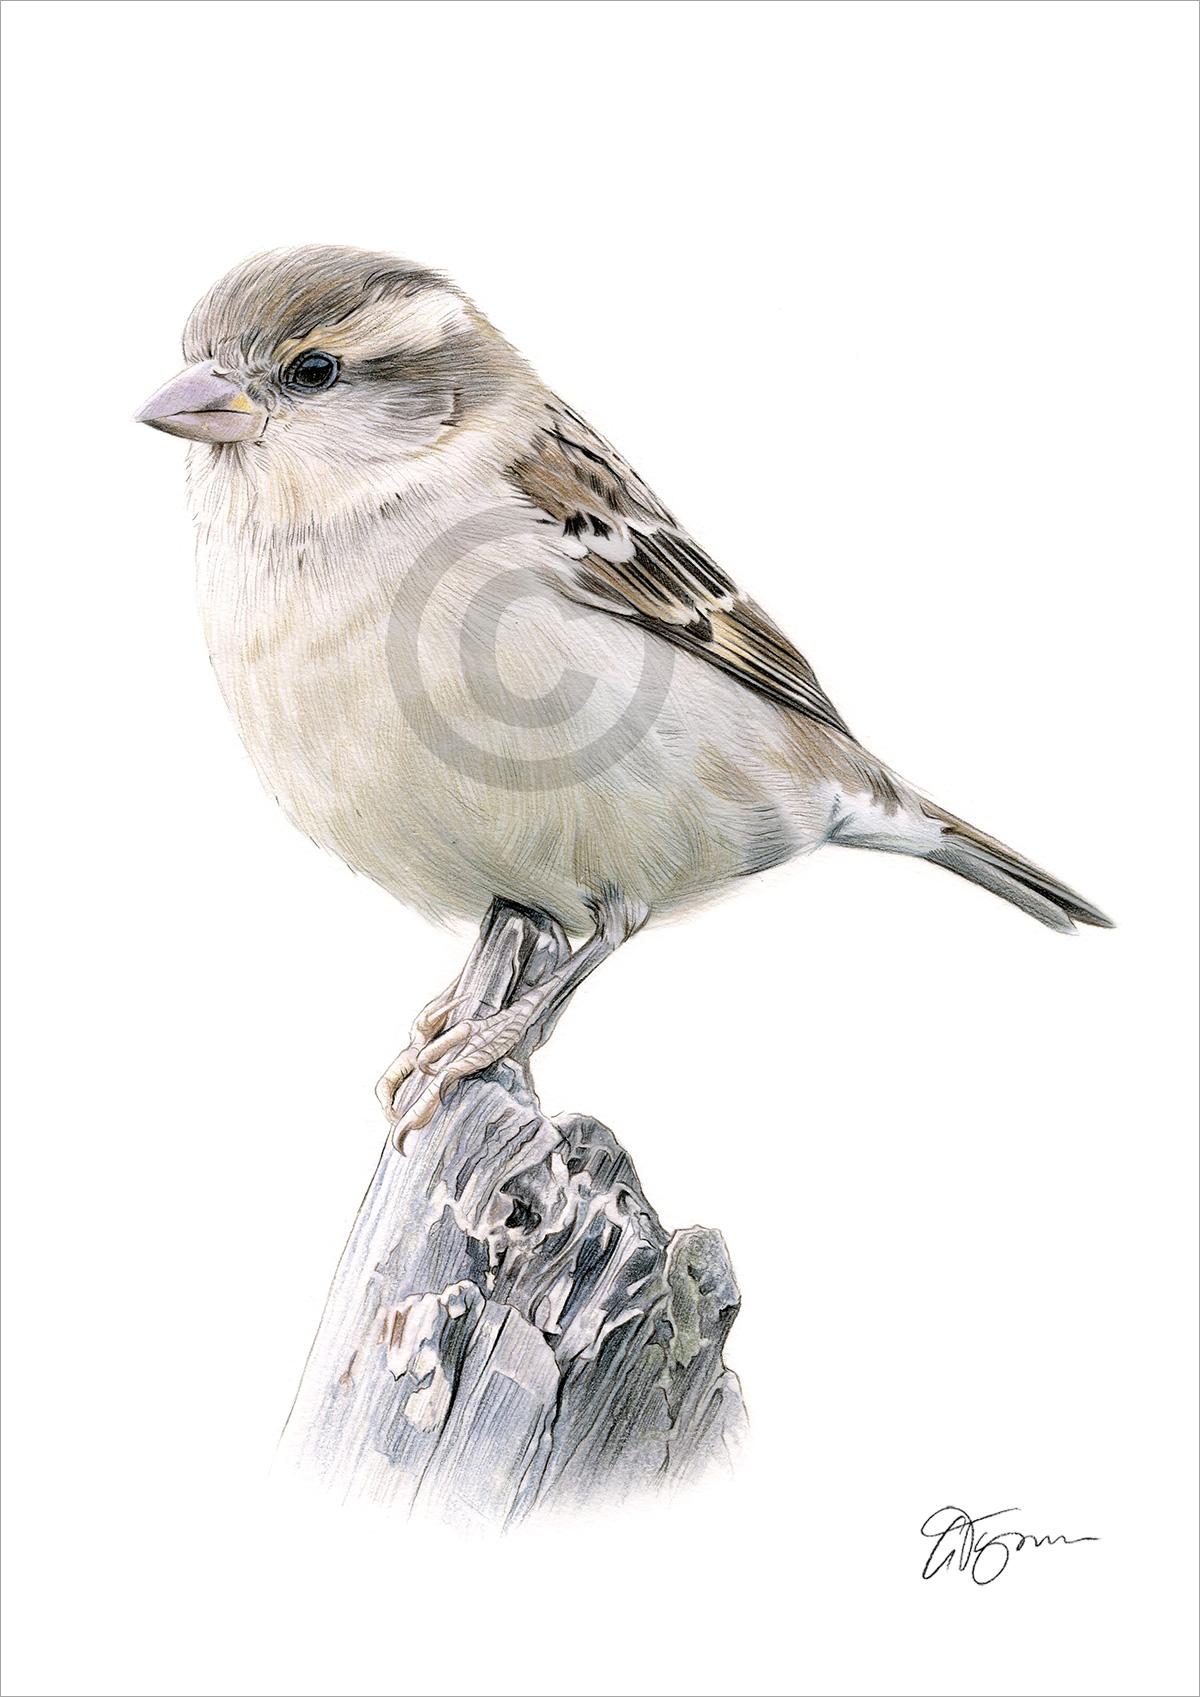 Colour pencil drawing of a female Sparrow by artist Gary Tymon